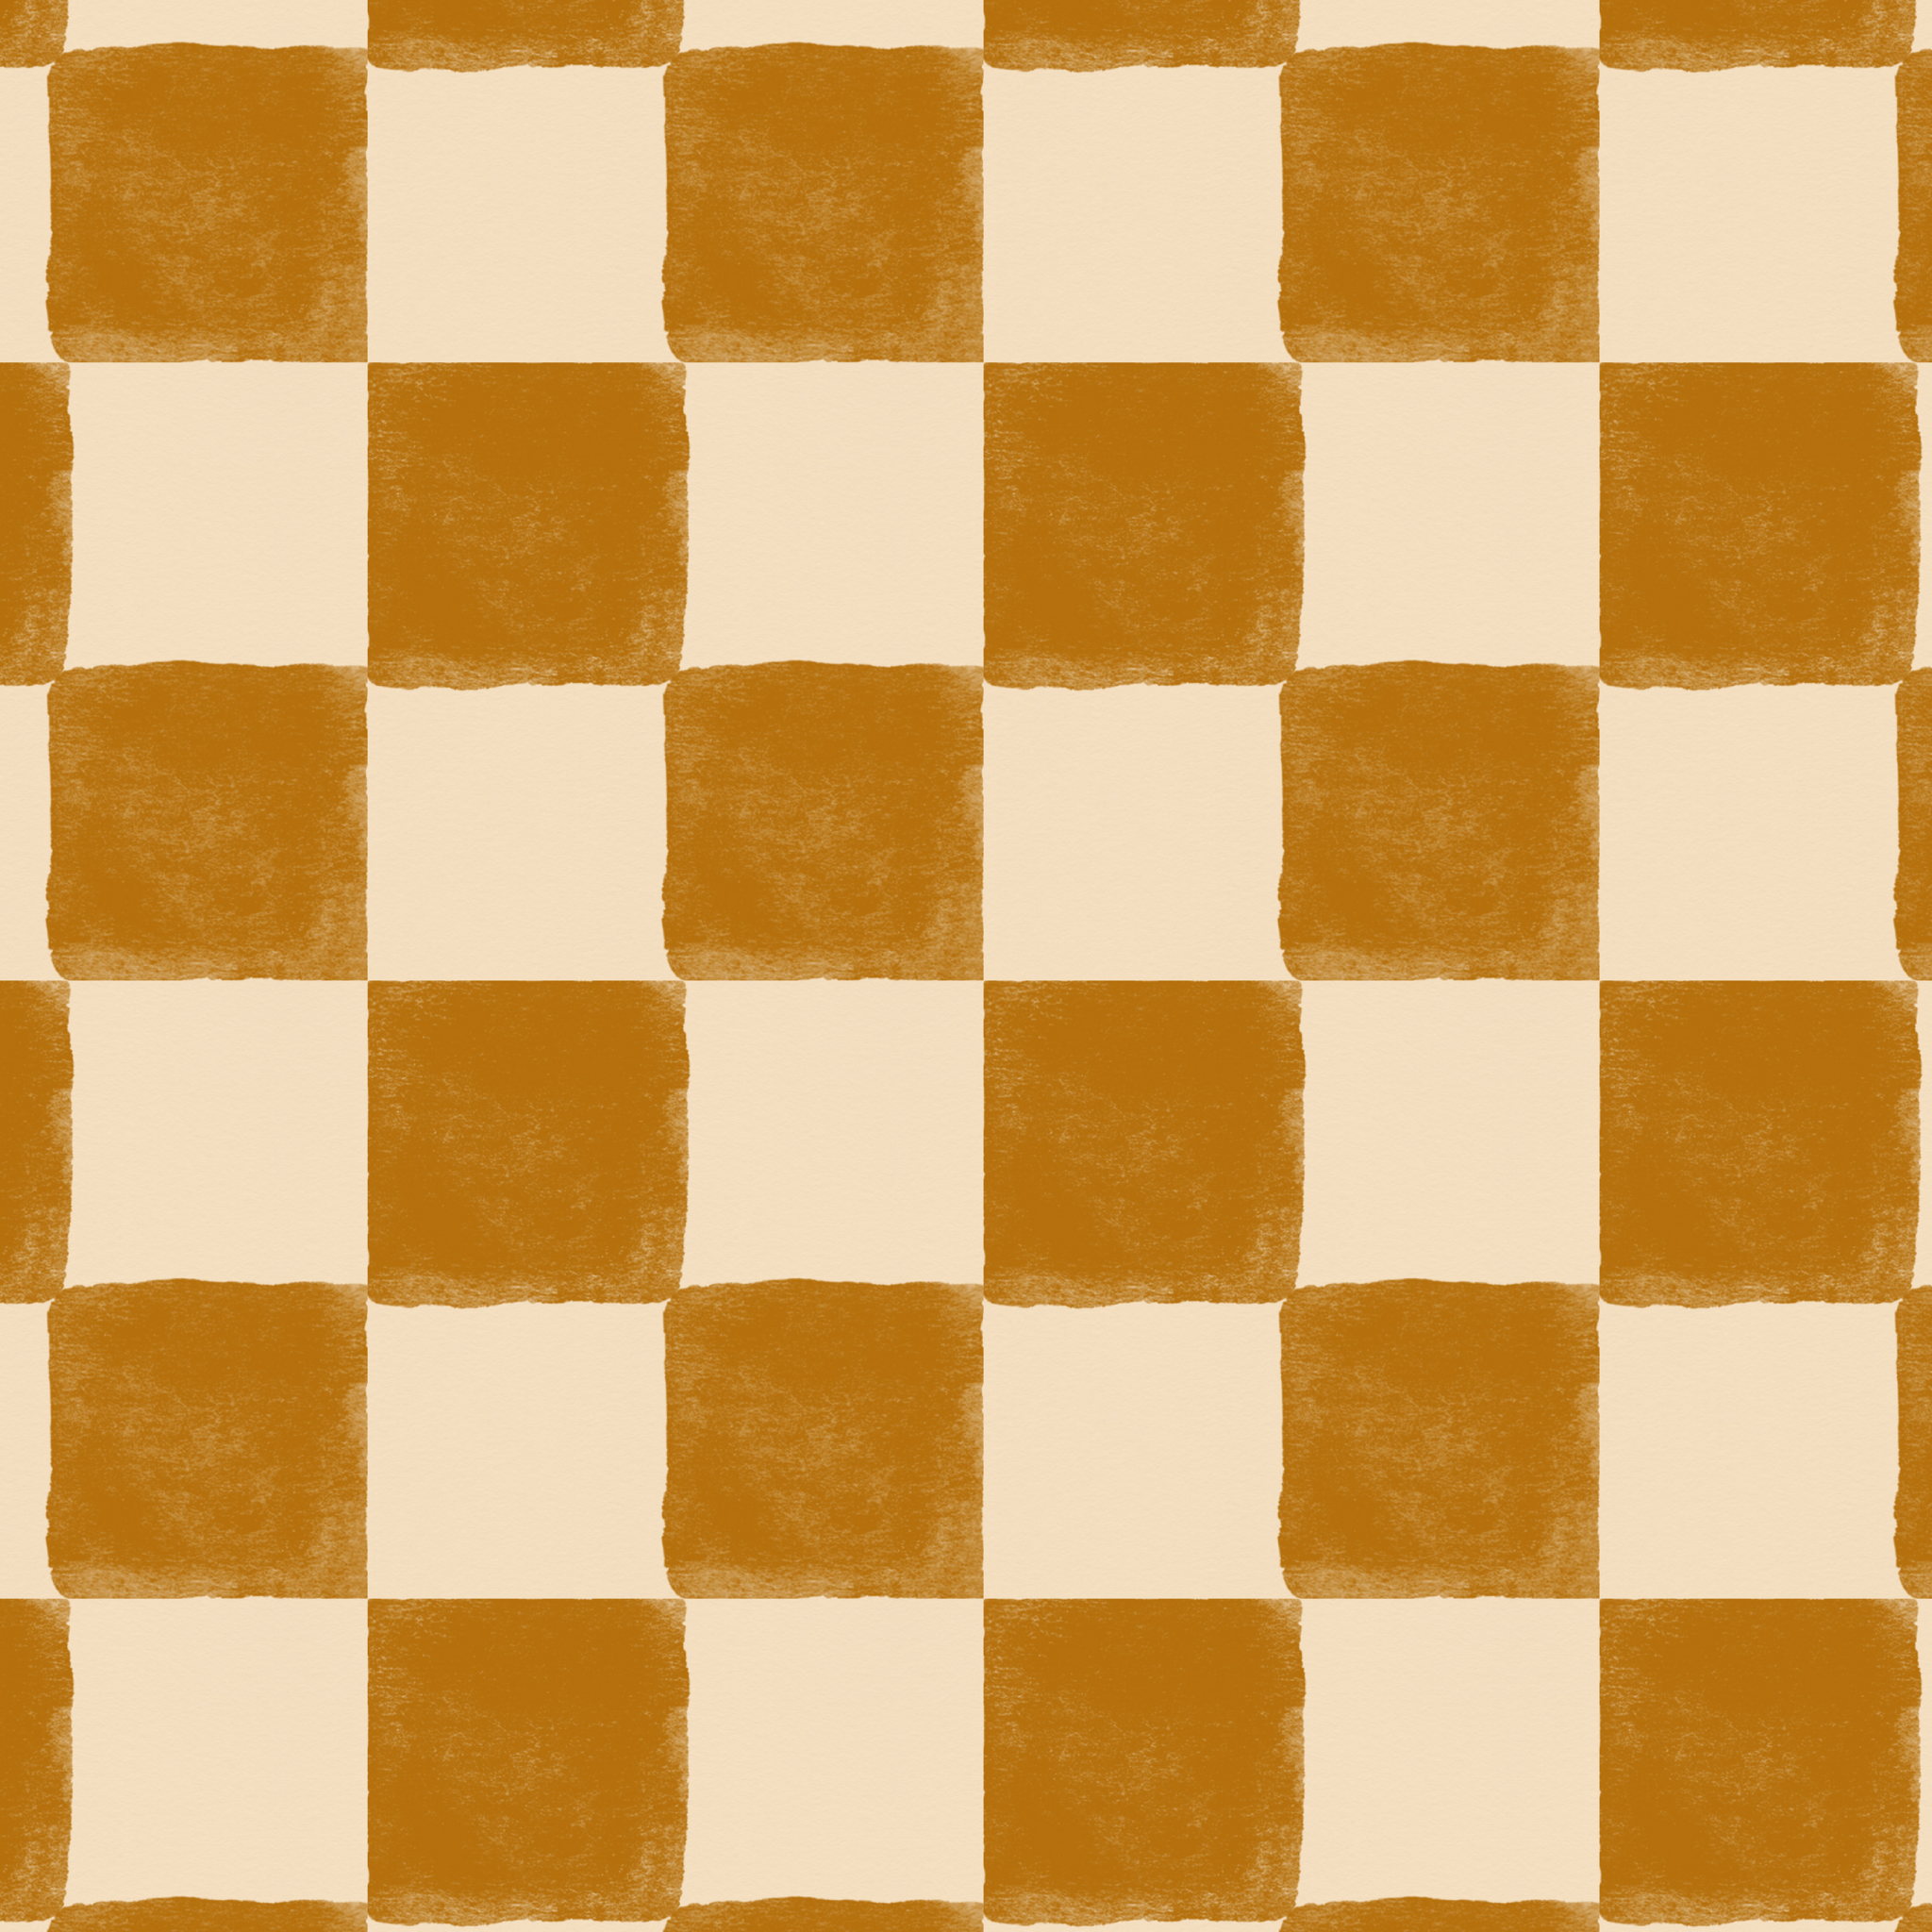 Burnt orange and cream checkered pattern wallpaper sample with a rustic texture and warm tones